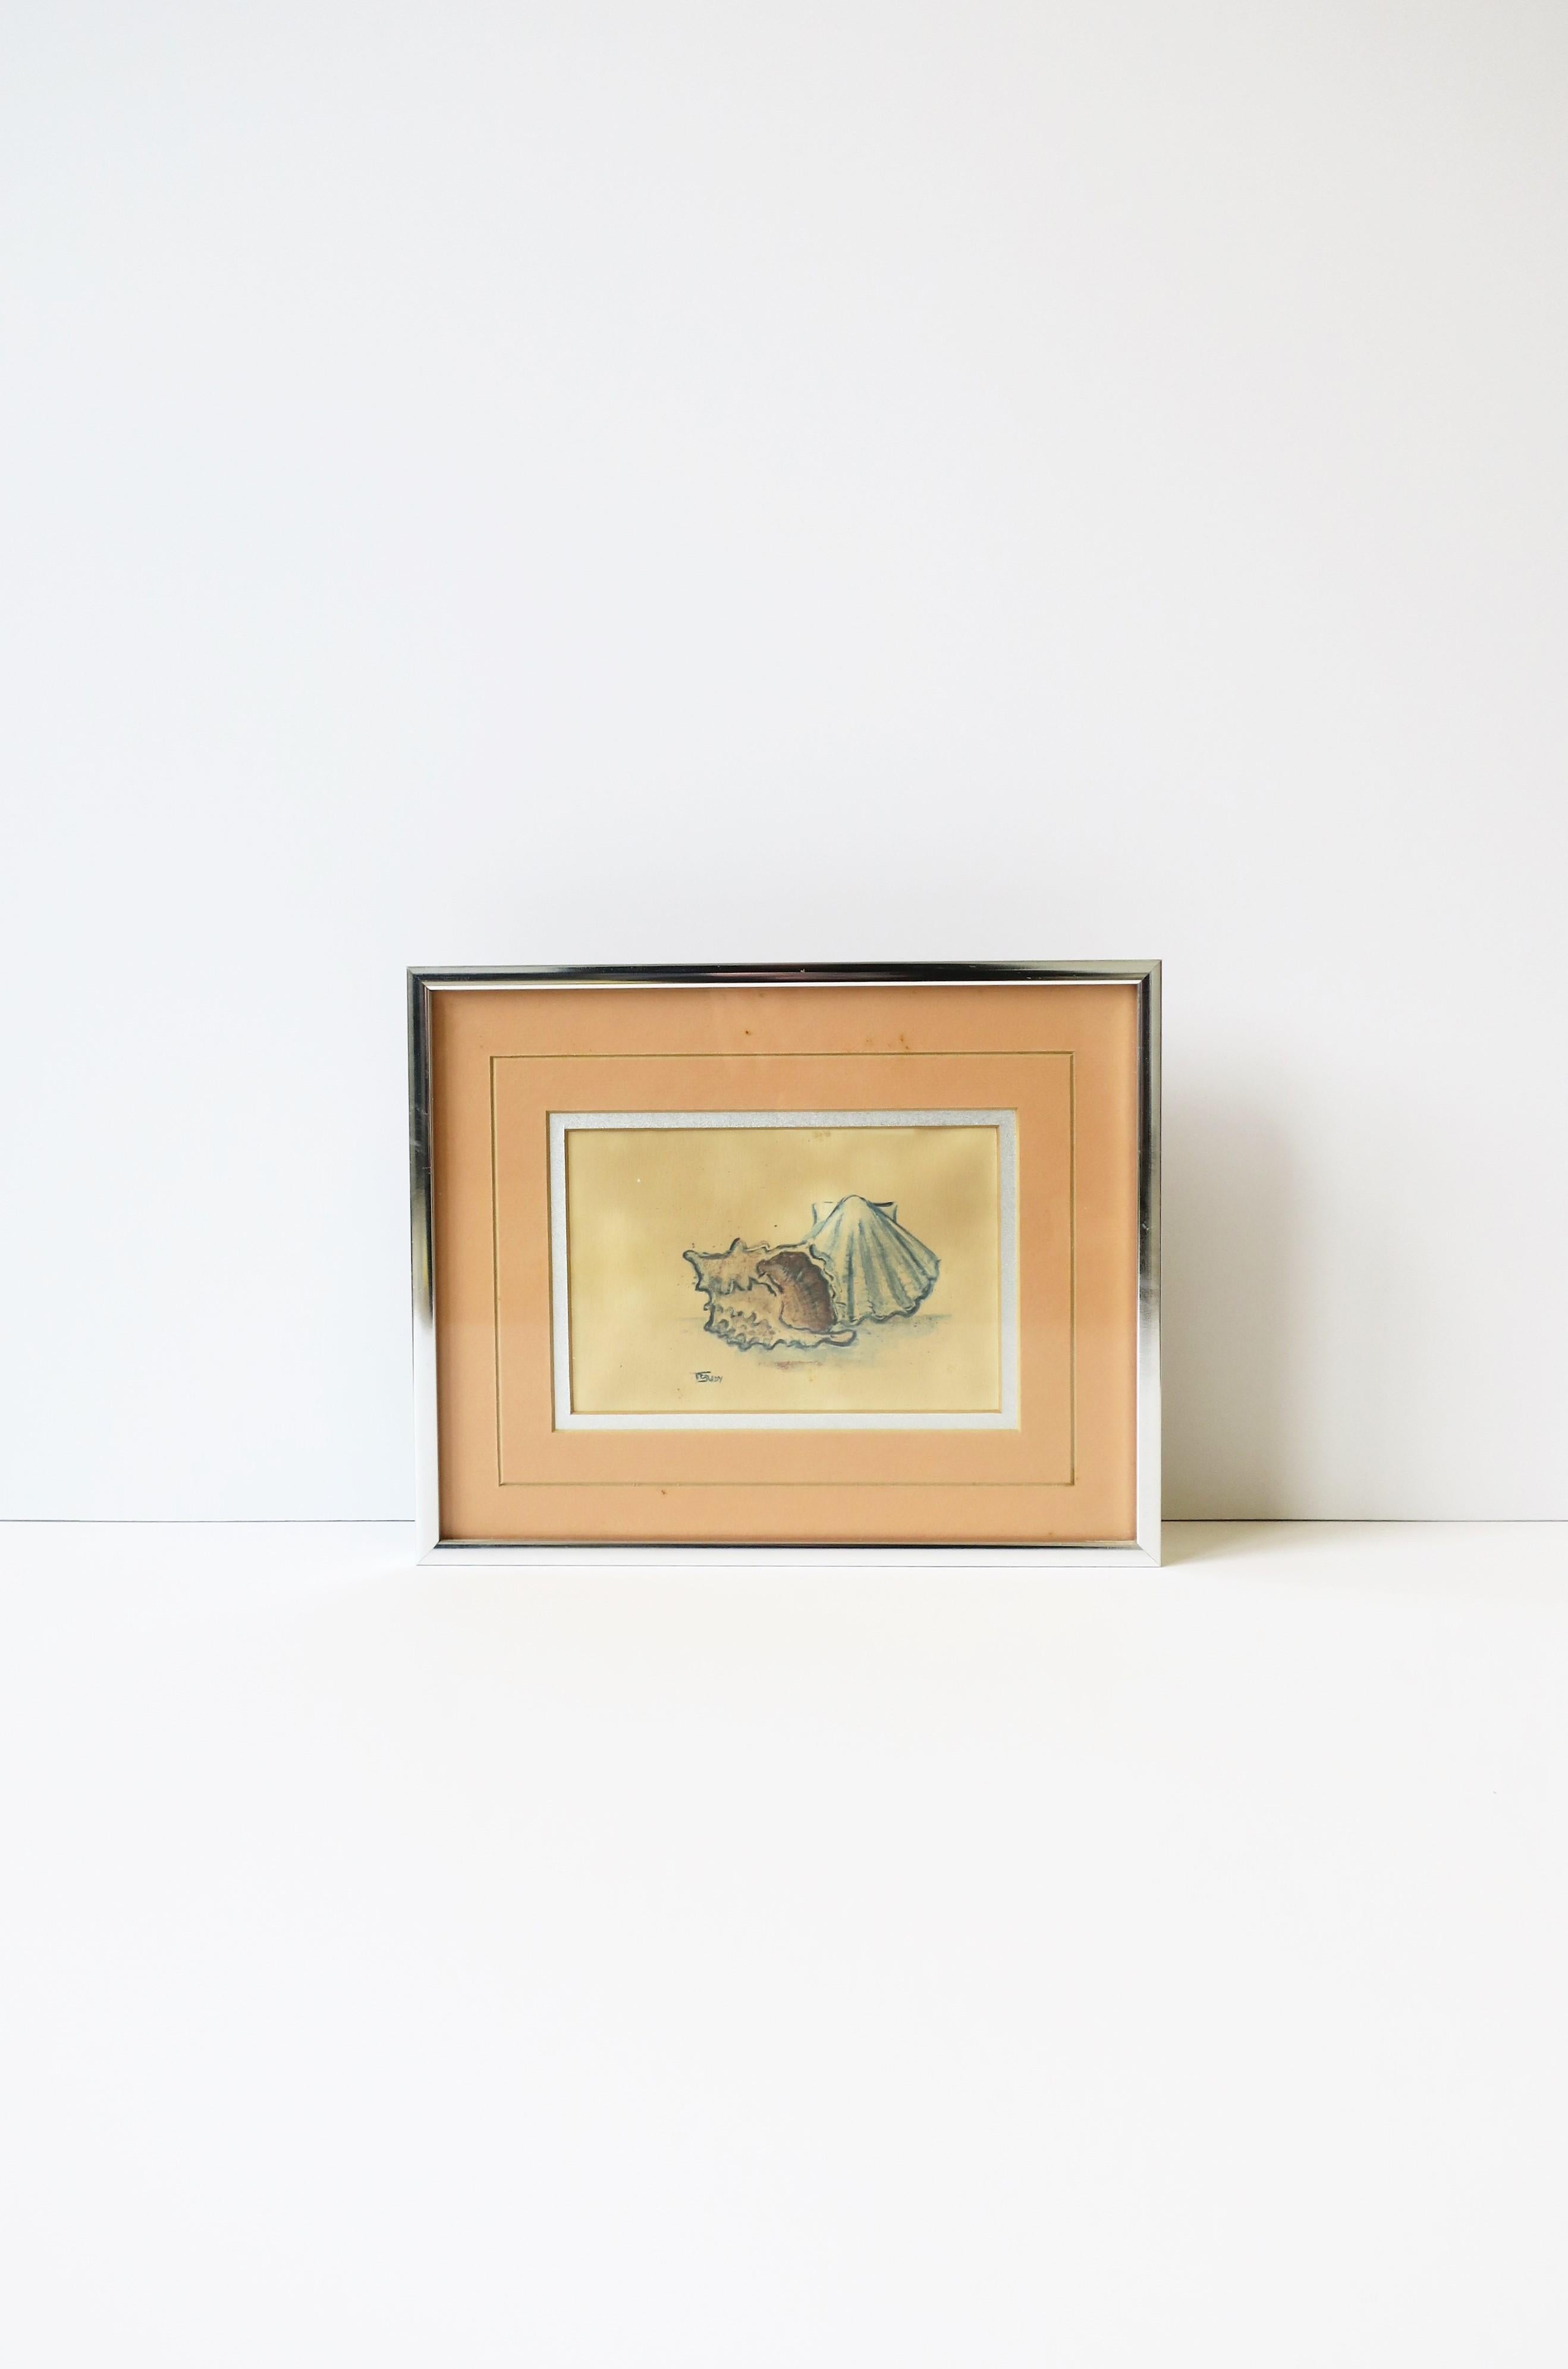 A small conch and scallop seashell [sea shell] watercolor art painting signed by artist (lower left), circa 1970s. Painting is surrounded by a pink salmon and silver matting, glass protection, and finished with a chrome frame. Prepared for handing